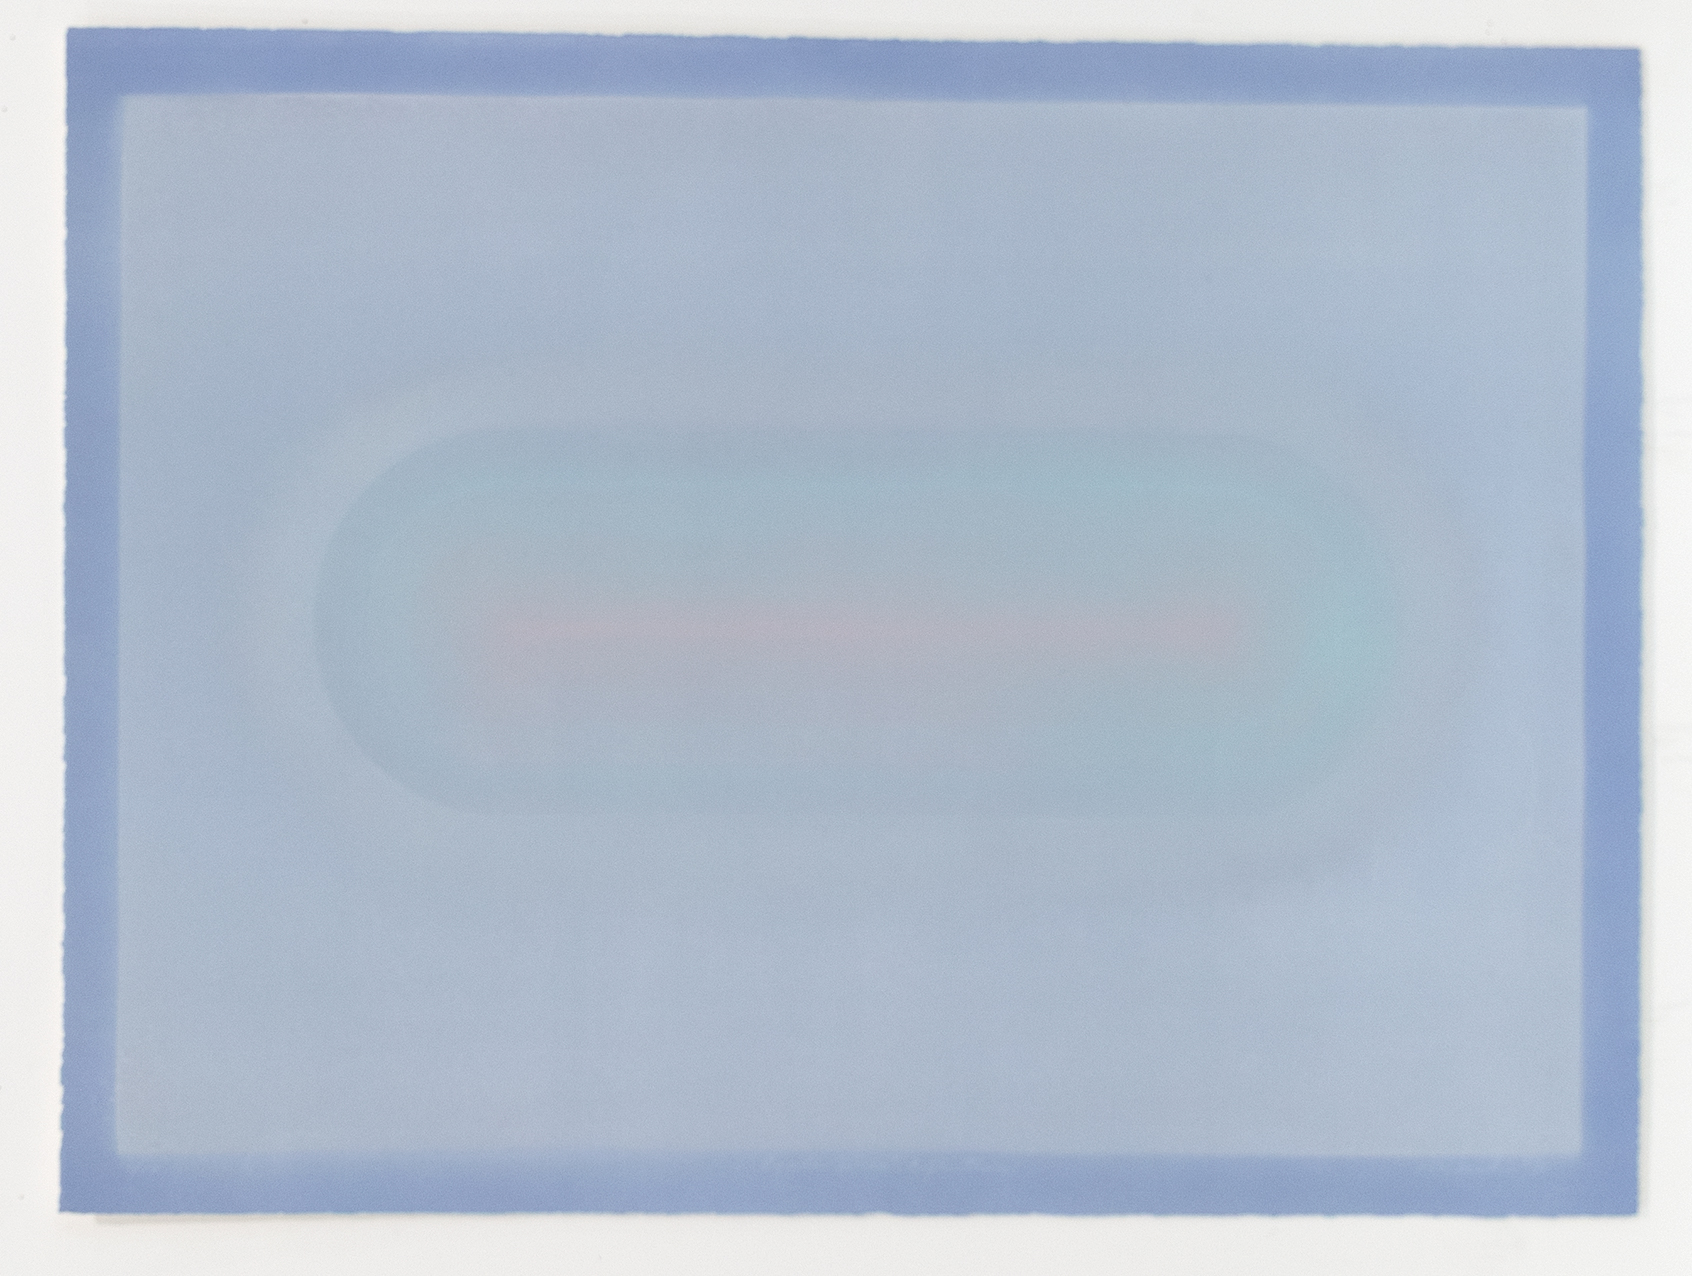 Ripple Series (Reflections), 1971 Lithograph 20 x 27 inches (50.8 x 68.6 cm) Edition of 10